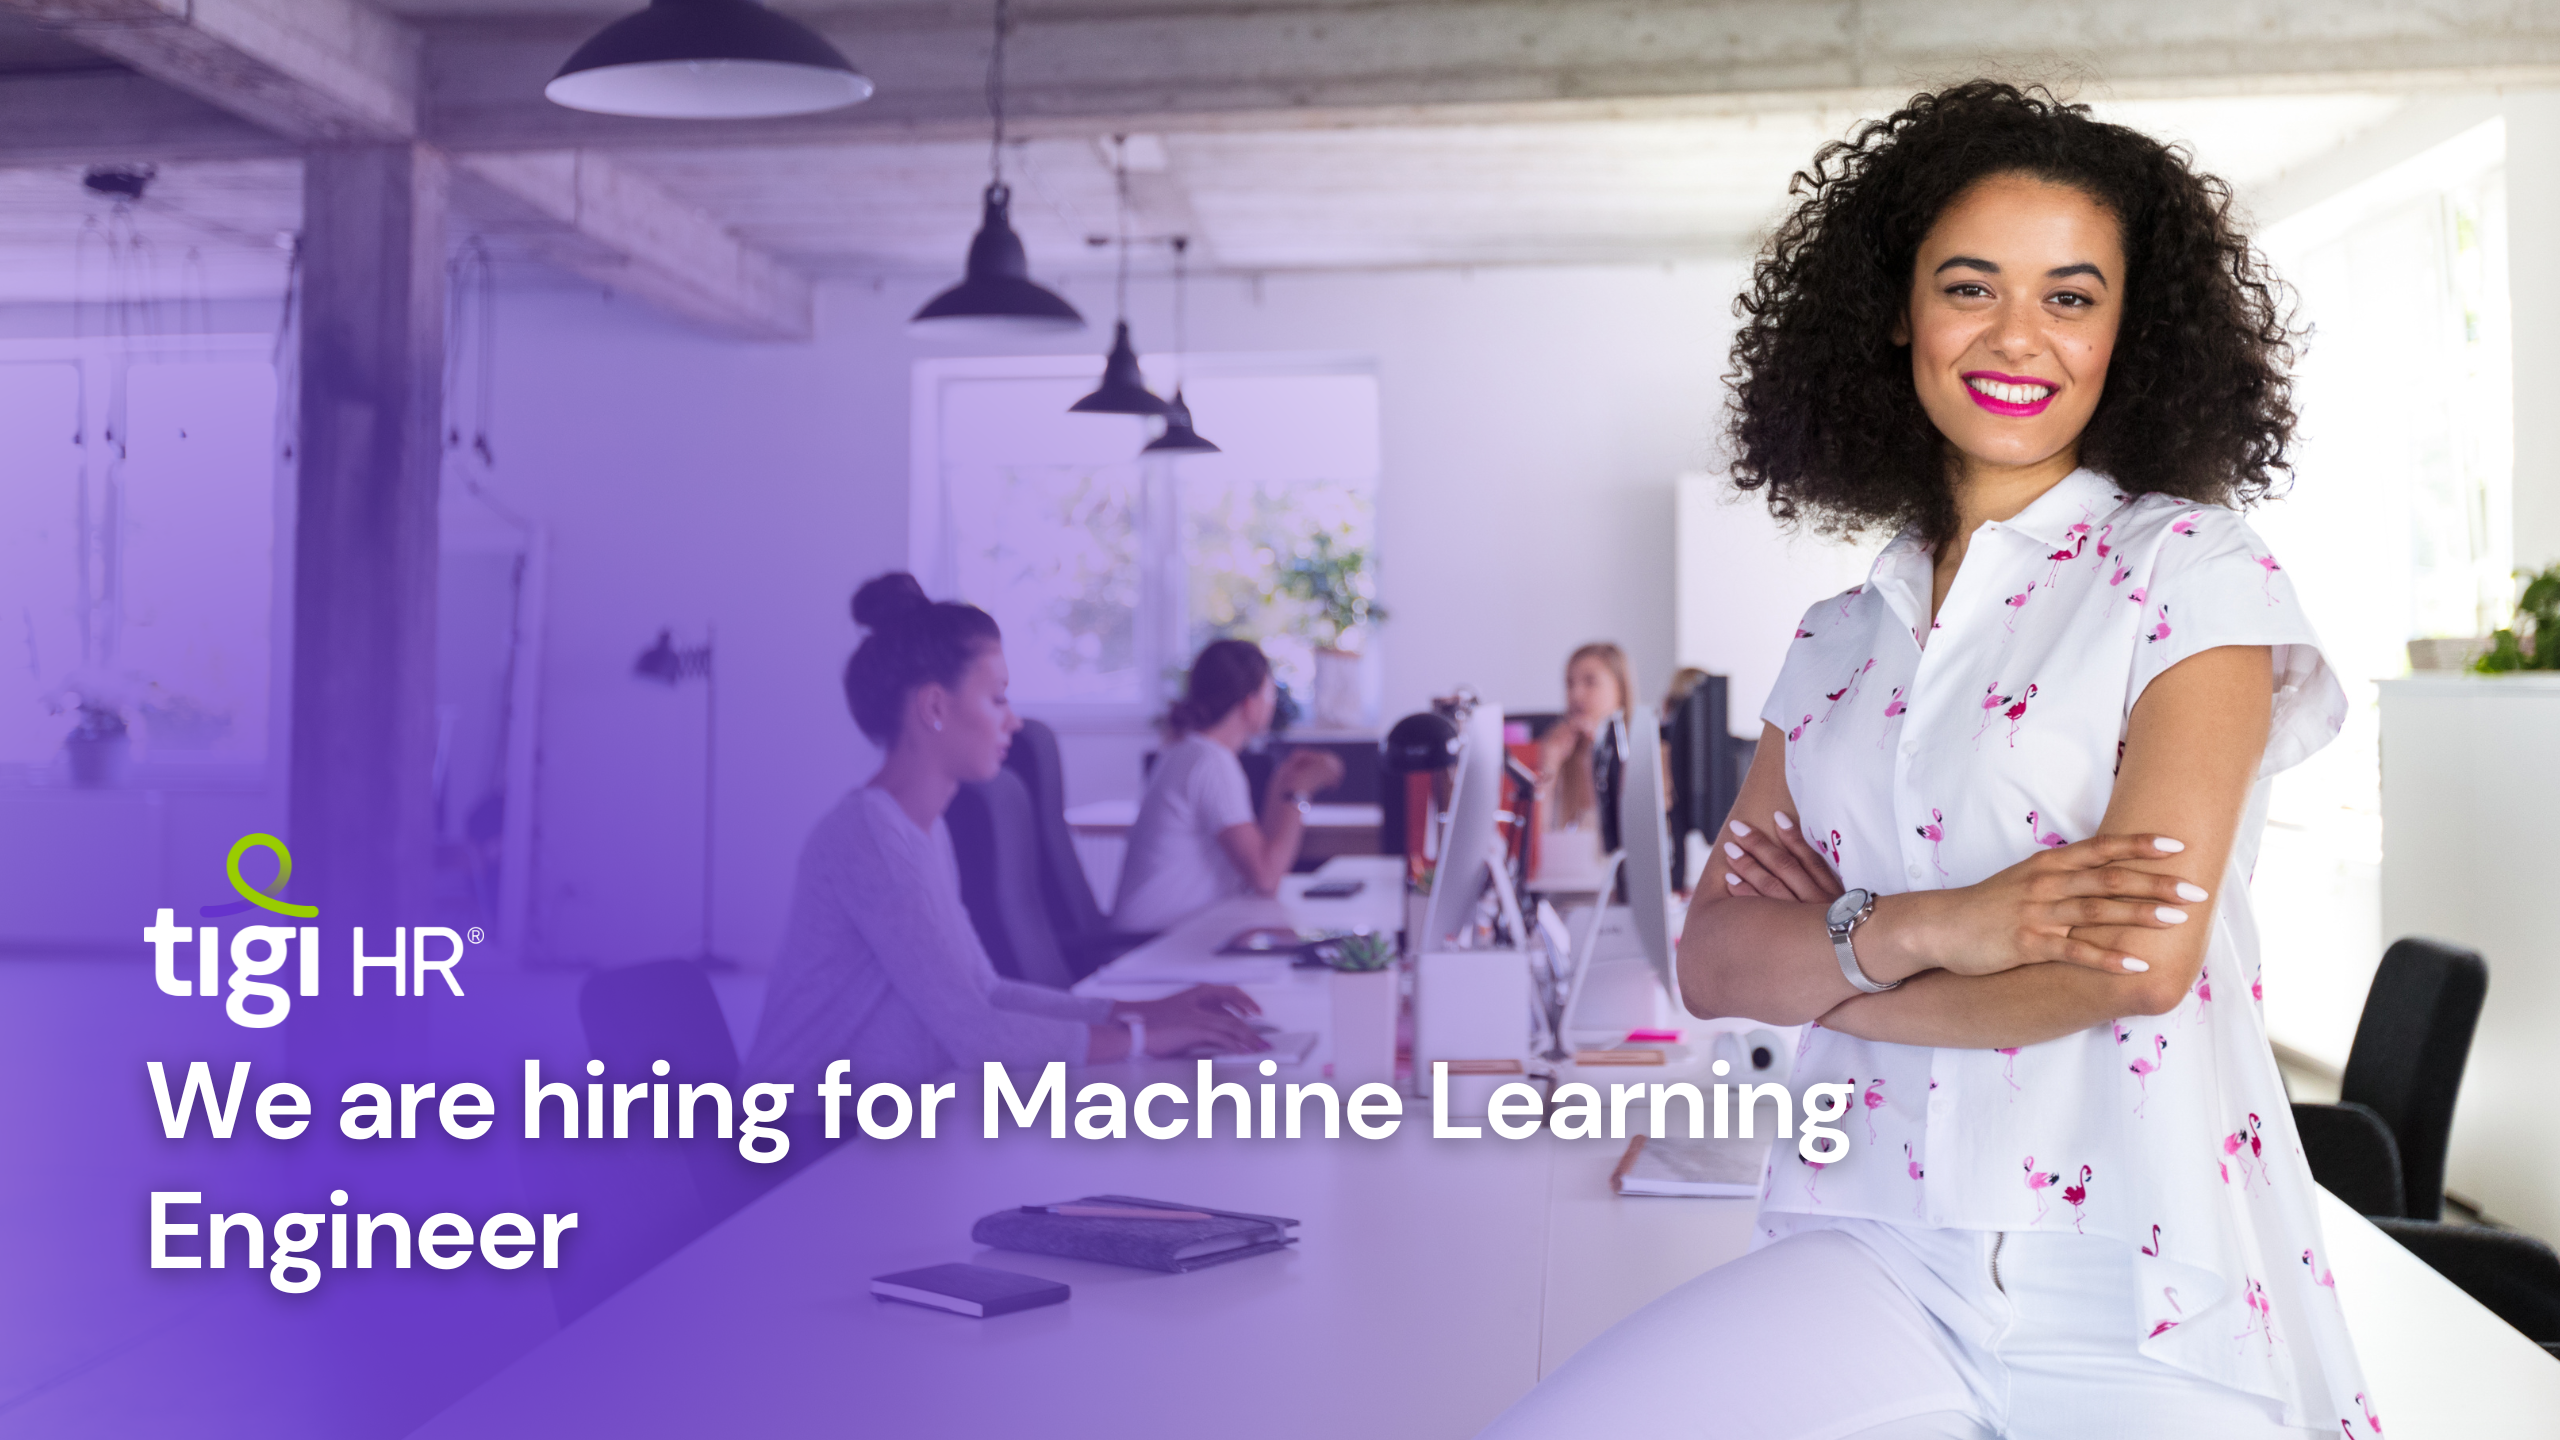 We are hiring for Machine Learning Engineer. Find jobs for Machine Learning Engineer.